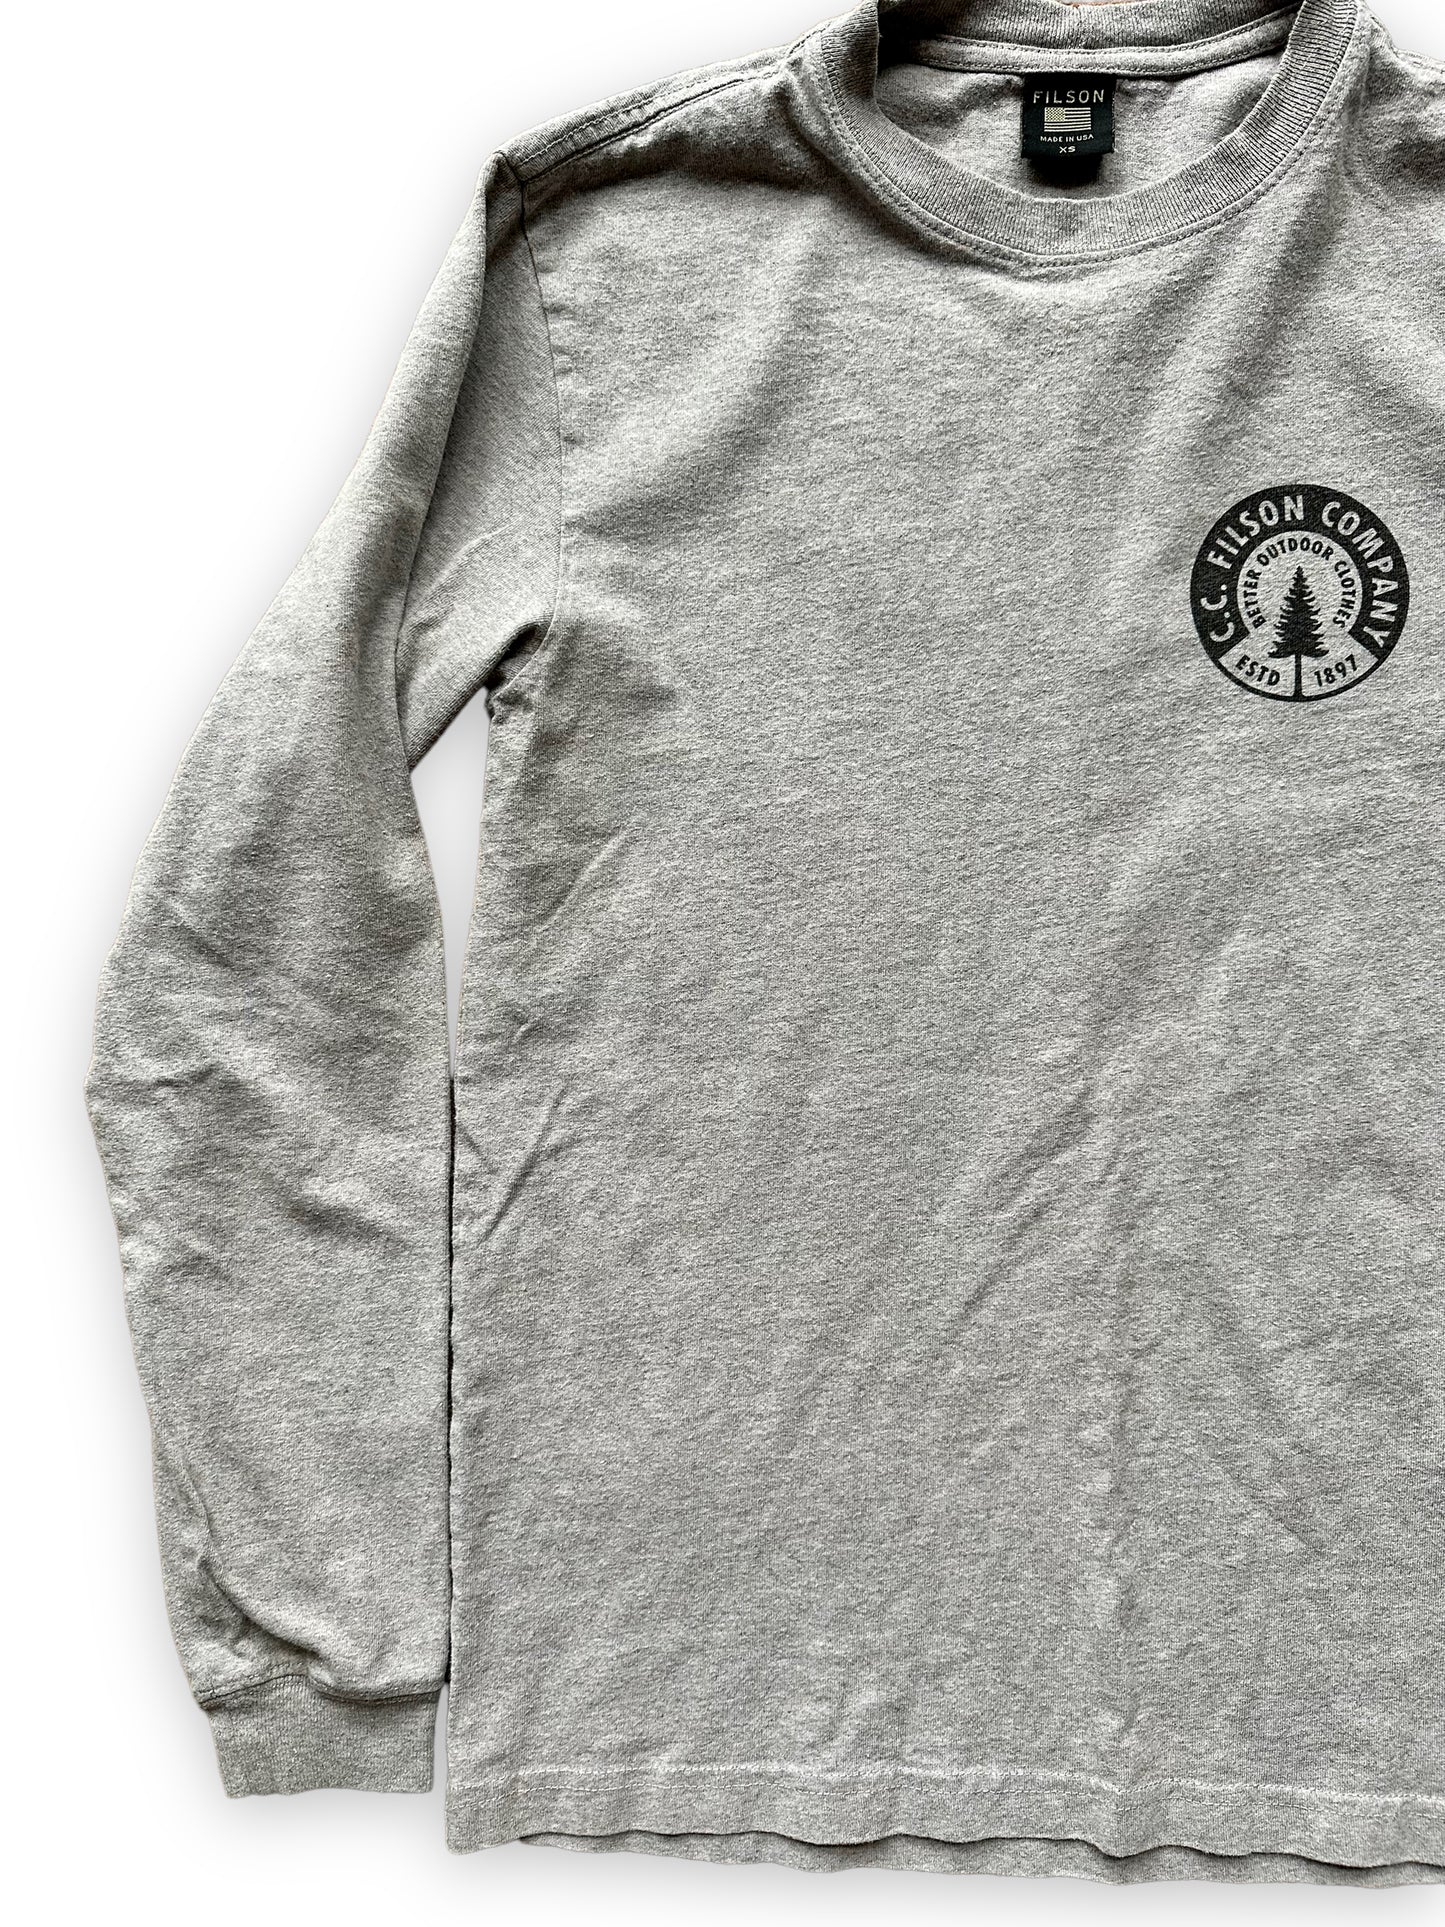 Front Right View on Filson Long Sleeve Heather Grey Tee SZ XS  |  Barn Owl Vintage Goods | Filson Graphic Tees Seattle